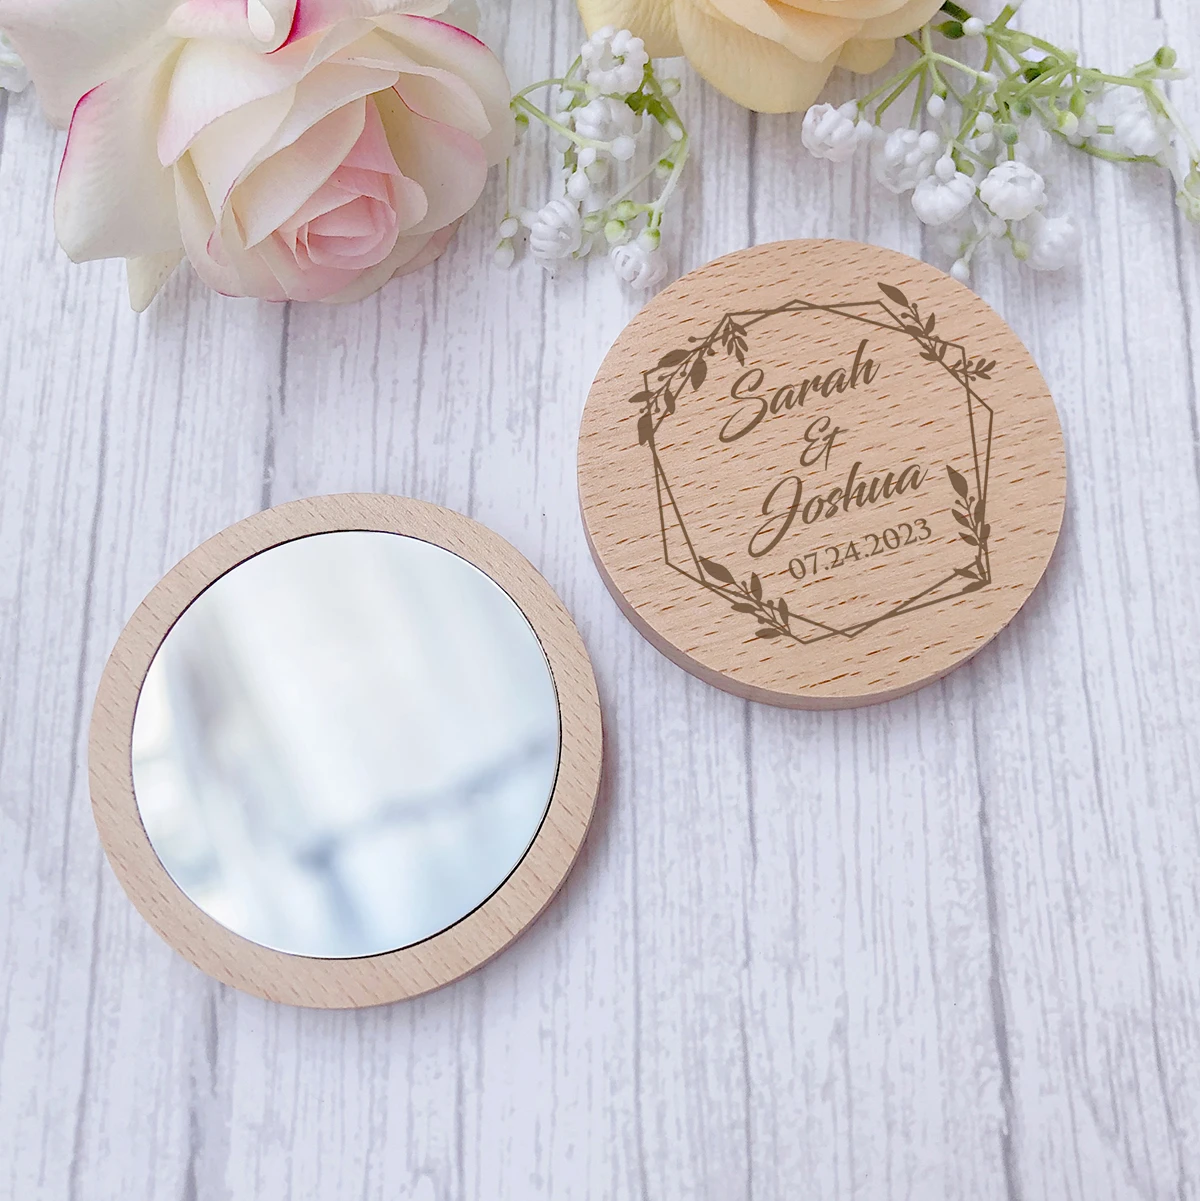 Personalized Wedding Gift Souvenir Wooden Back Pocket Mirror Bridal Shower Wedding Party Favor For Guests Purse Makeup Mirror